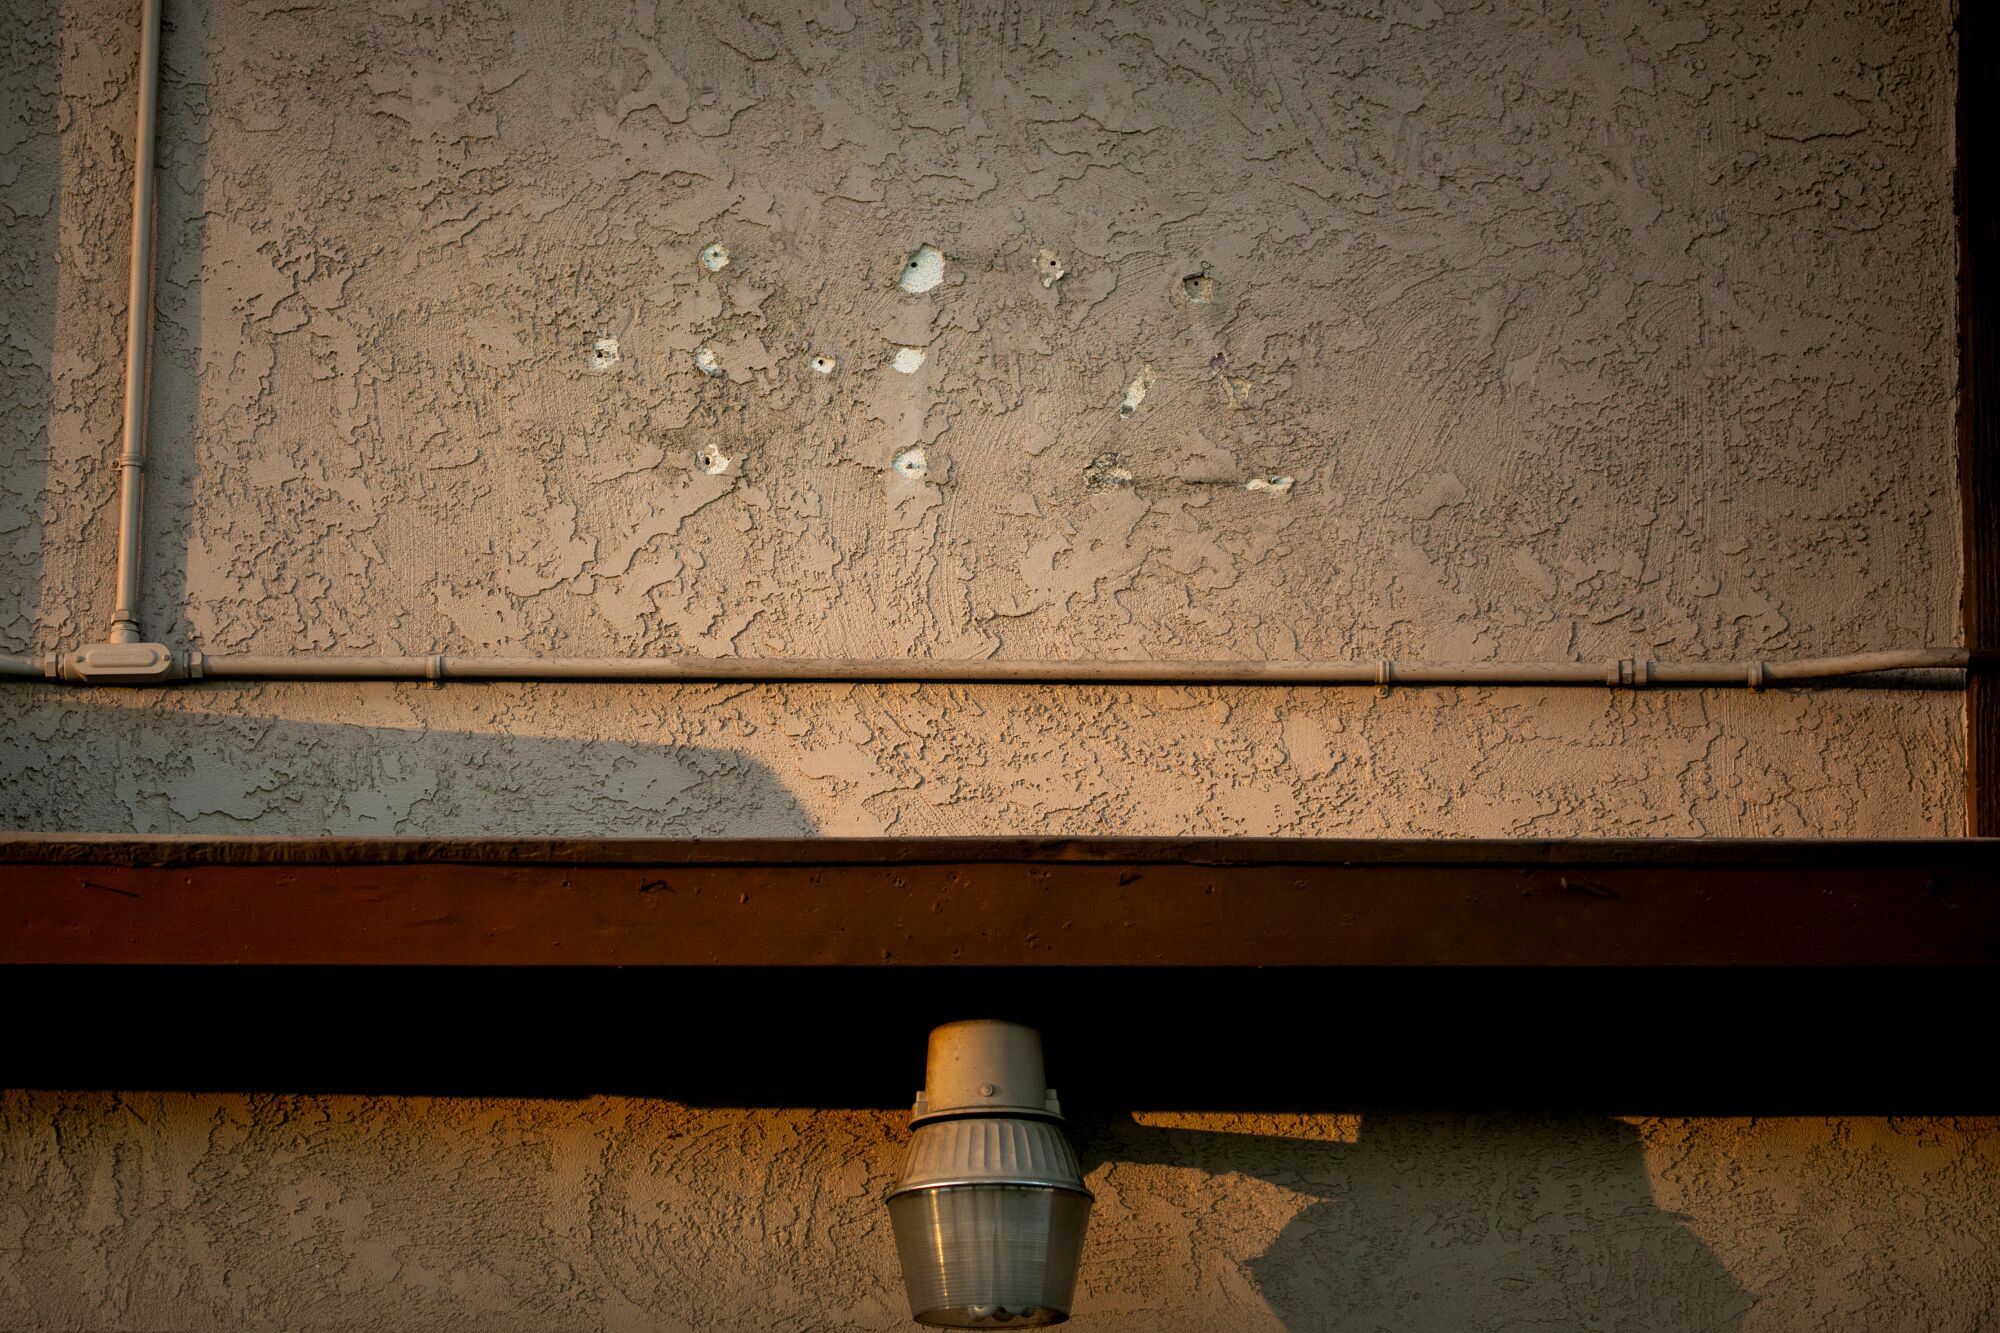 Marks are left behind where the greek letters have been removed from the former Phi Gamma Delta